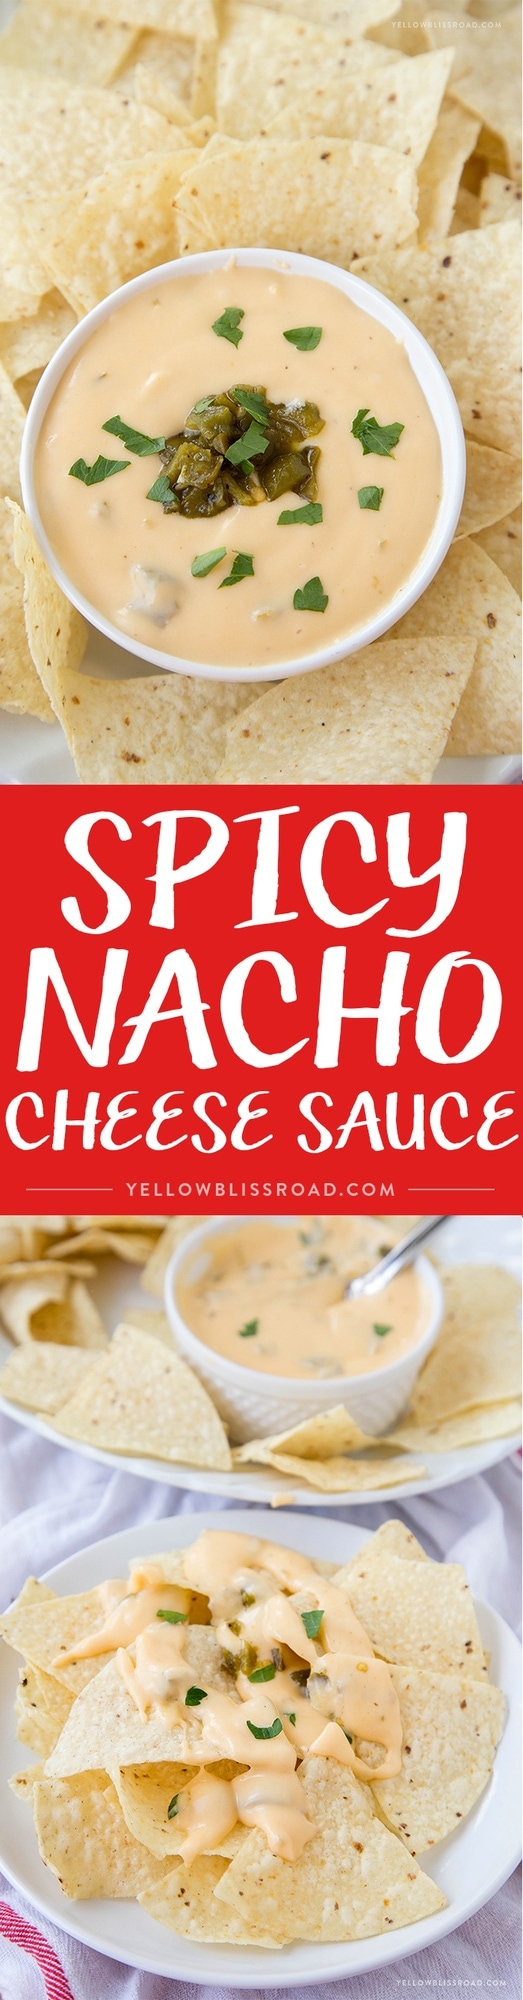 Easy Homemade Spicy Nacho Cheese Sauce - A delicious cheese sauce with jalapenos that's ready in just 5 minutes! Great for nachos, tacos and more!